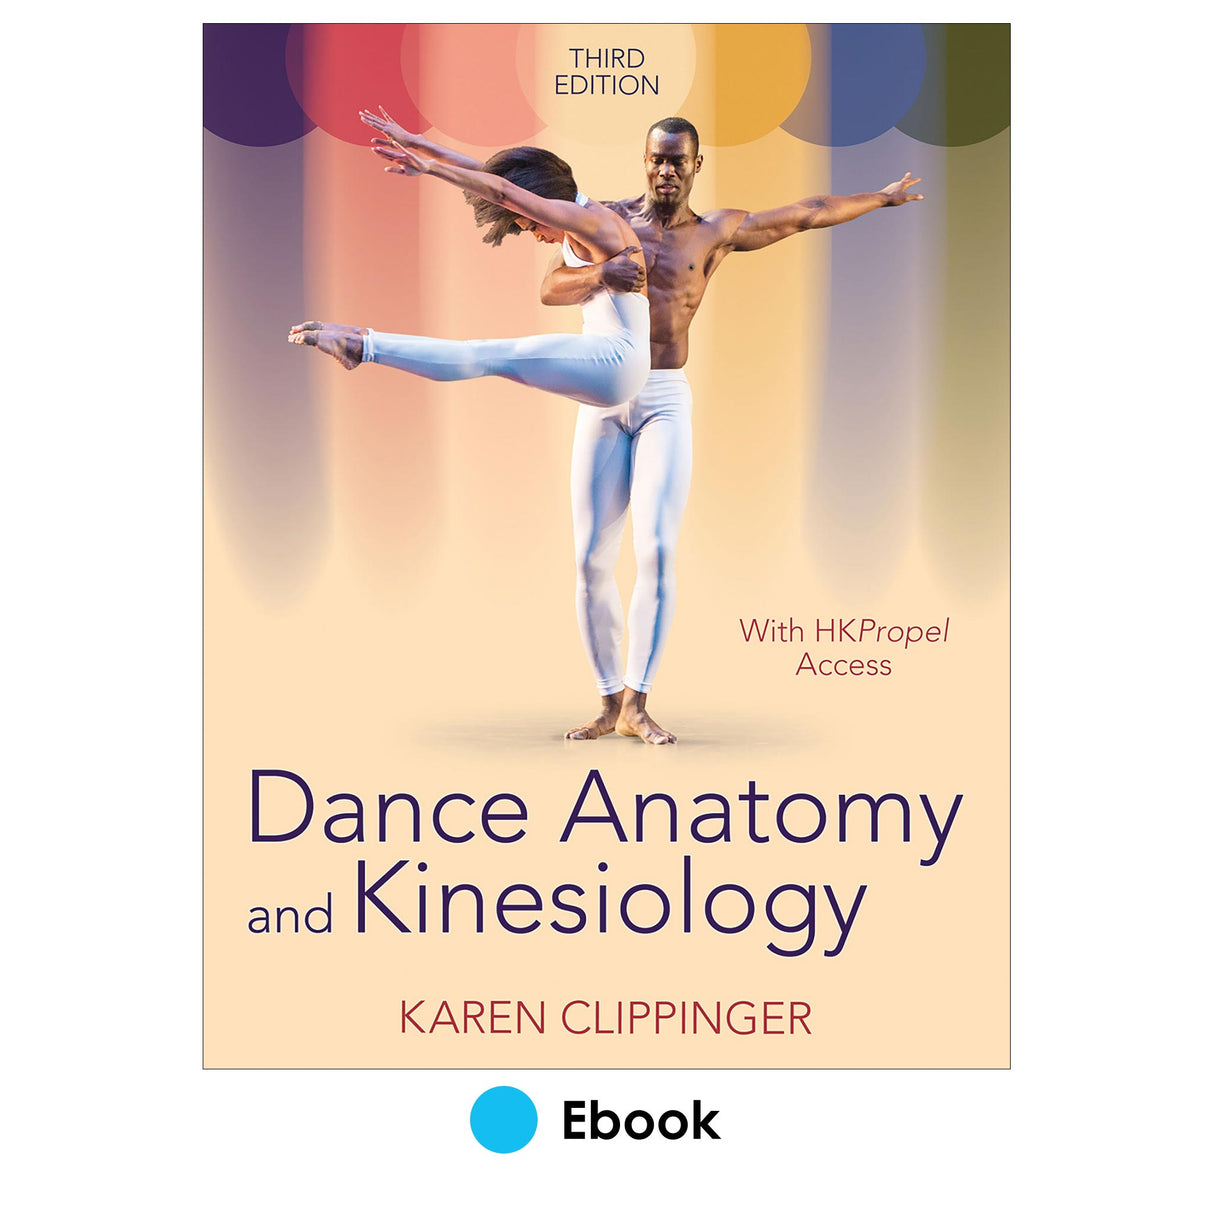 Dance Anatomy and Kinesiology 3rd Edition Ebook With HKPropel Access